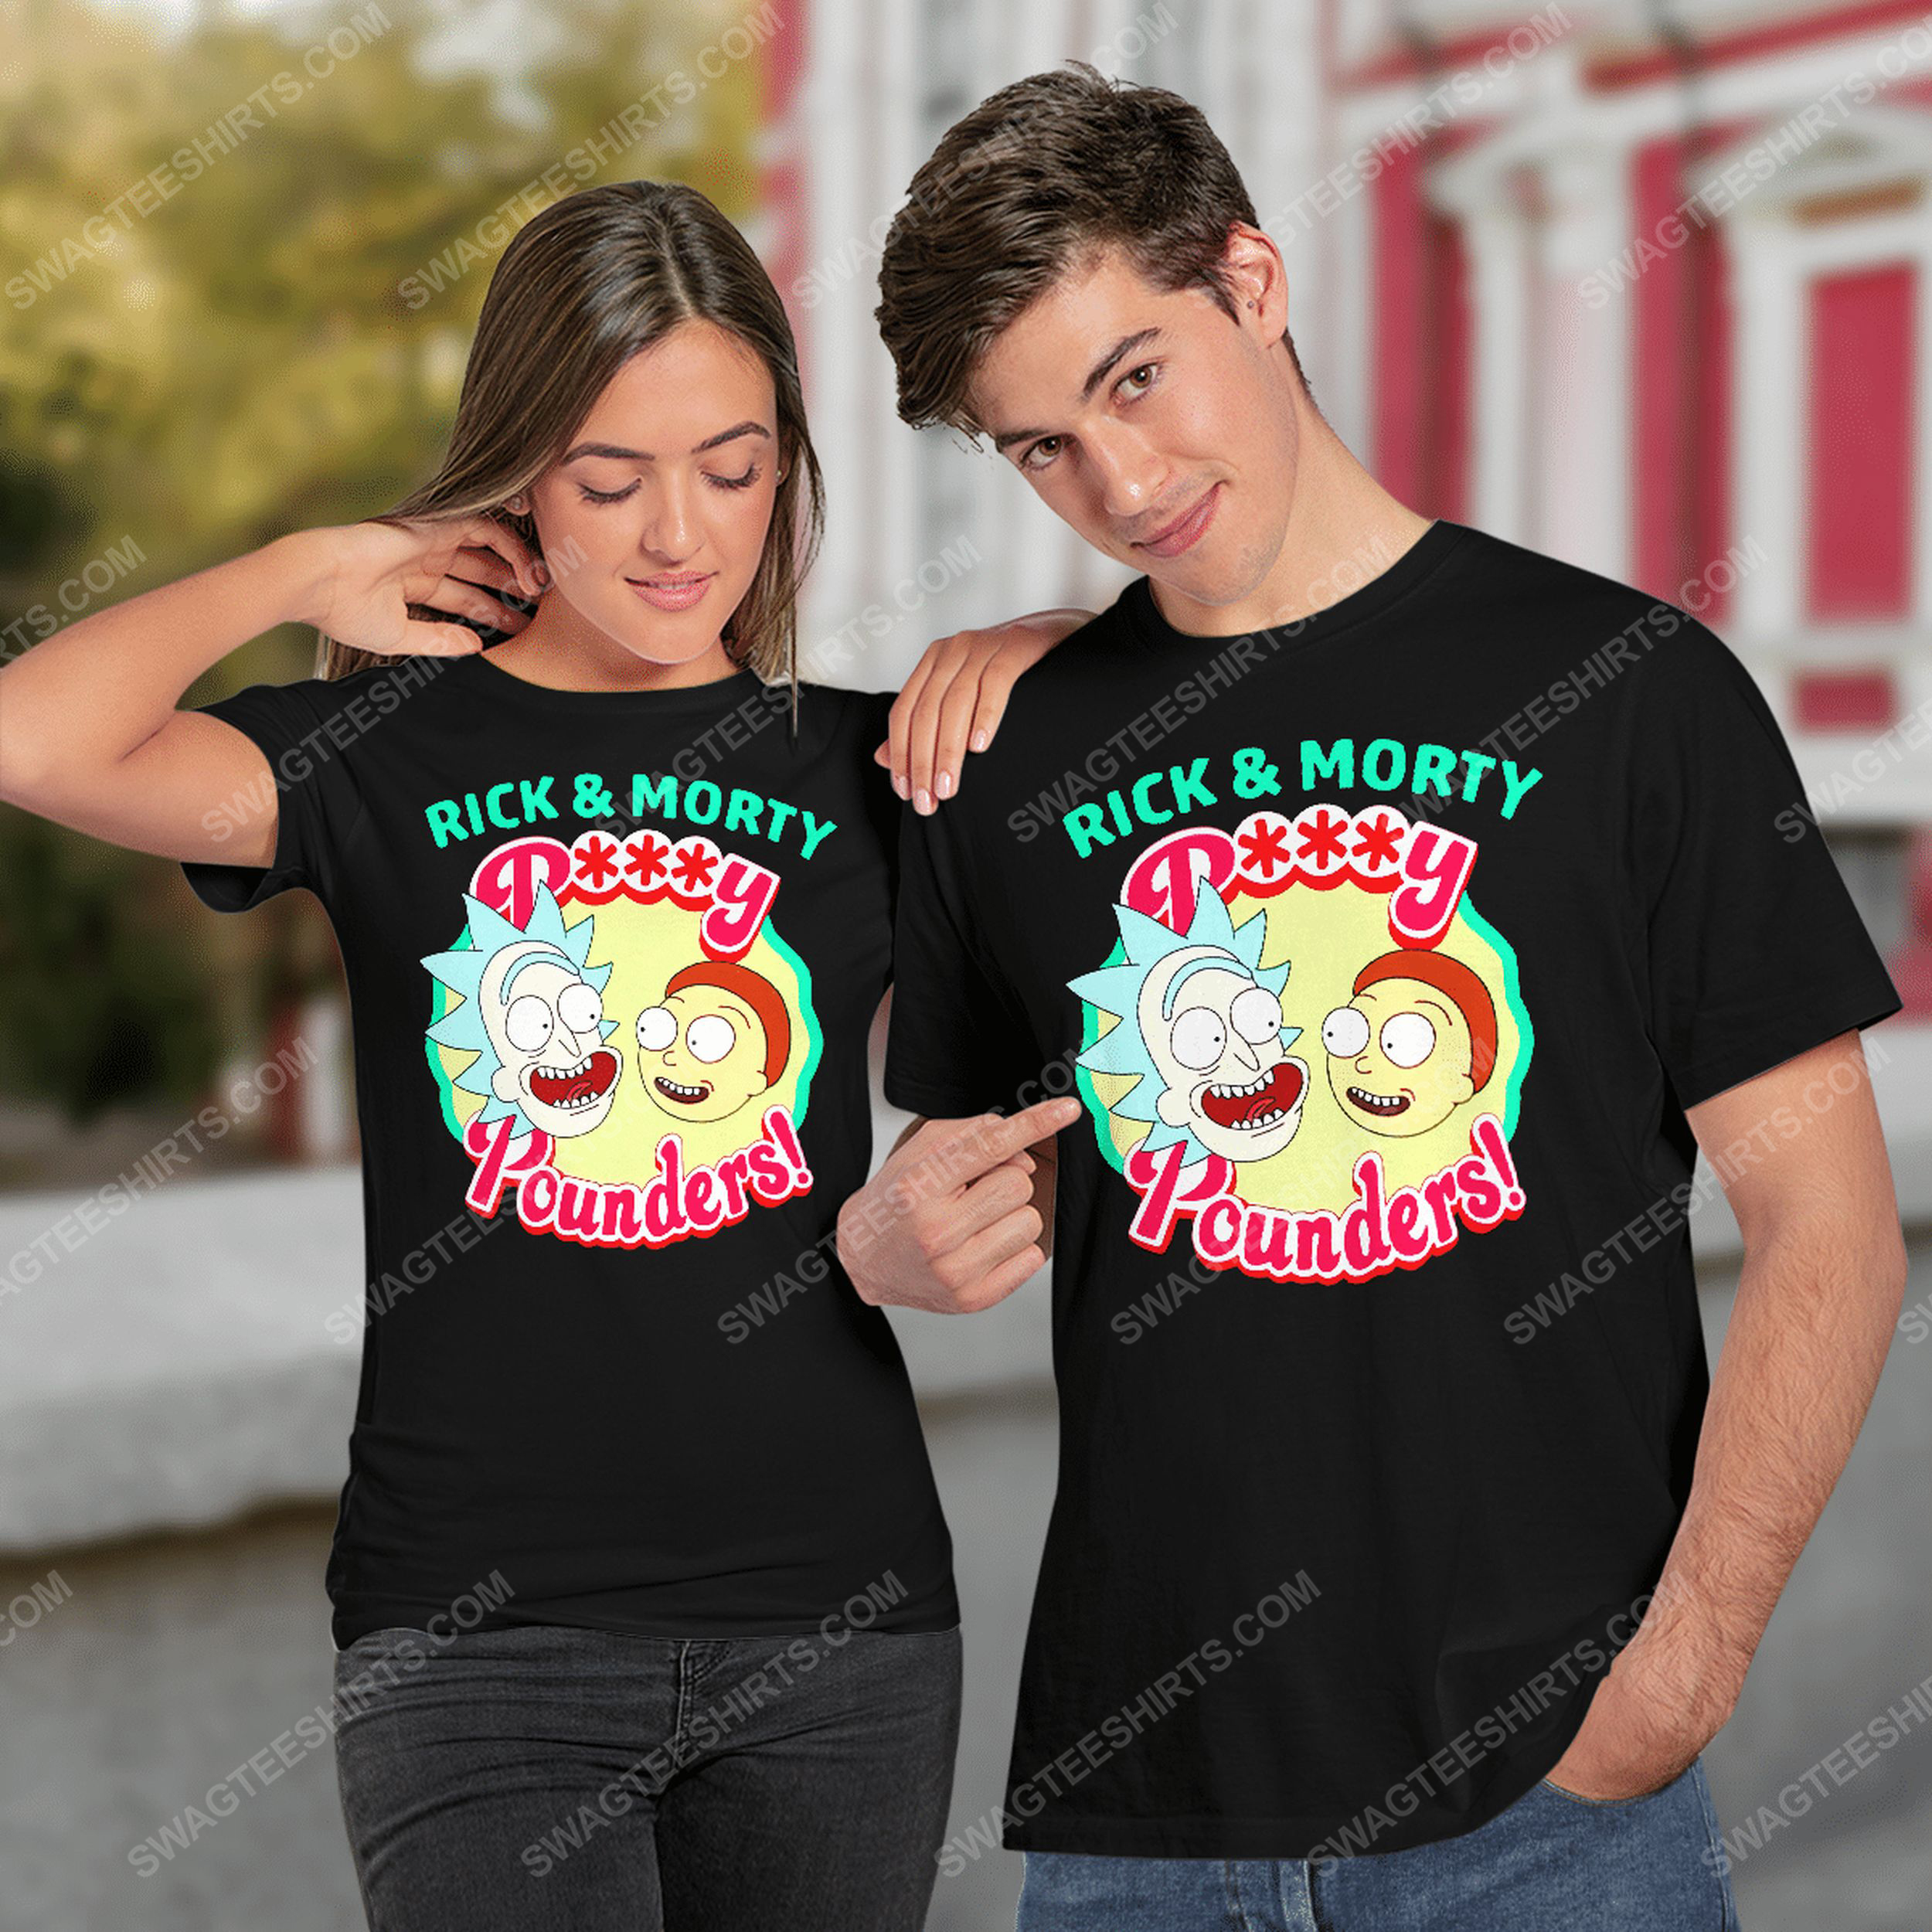 Tv show rick and morty pussy pounders tshirt(1)